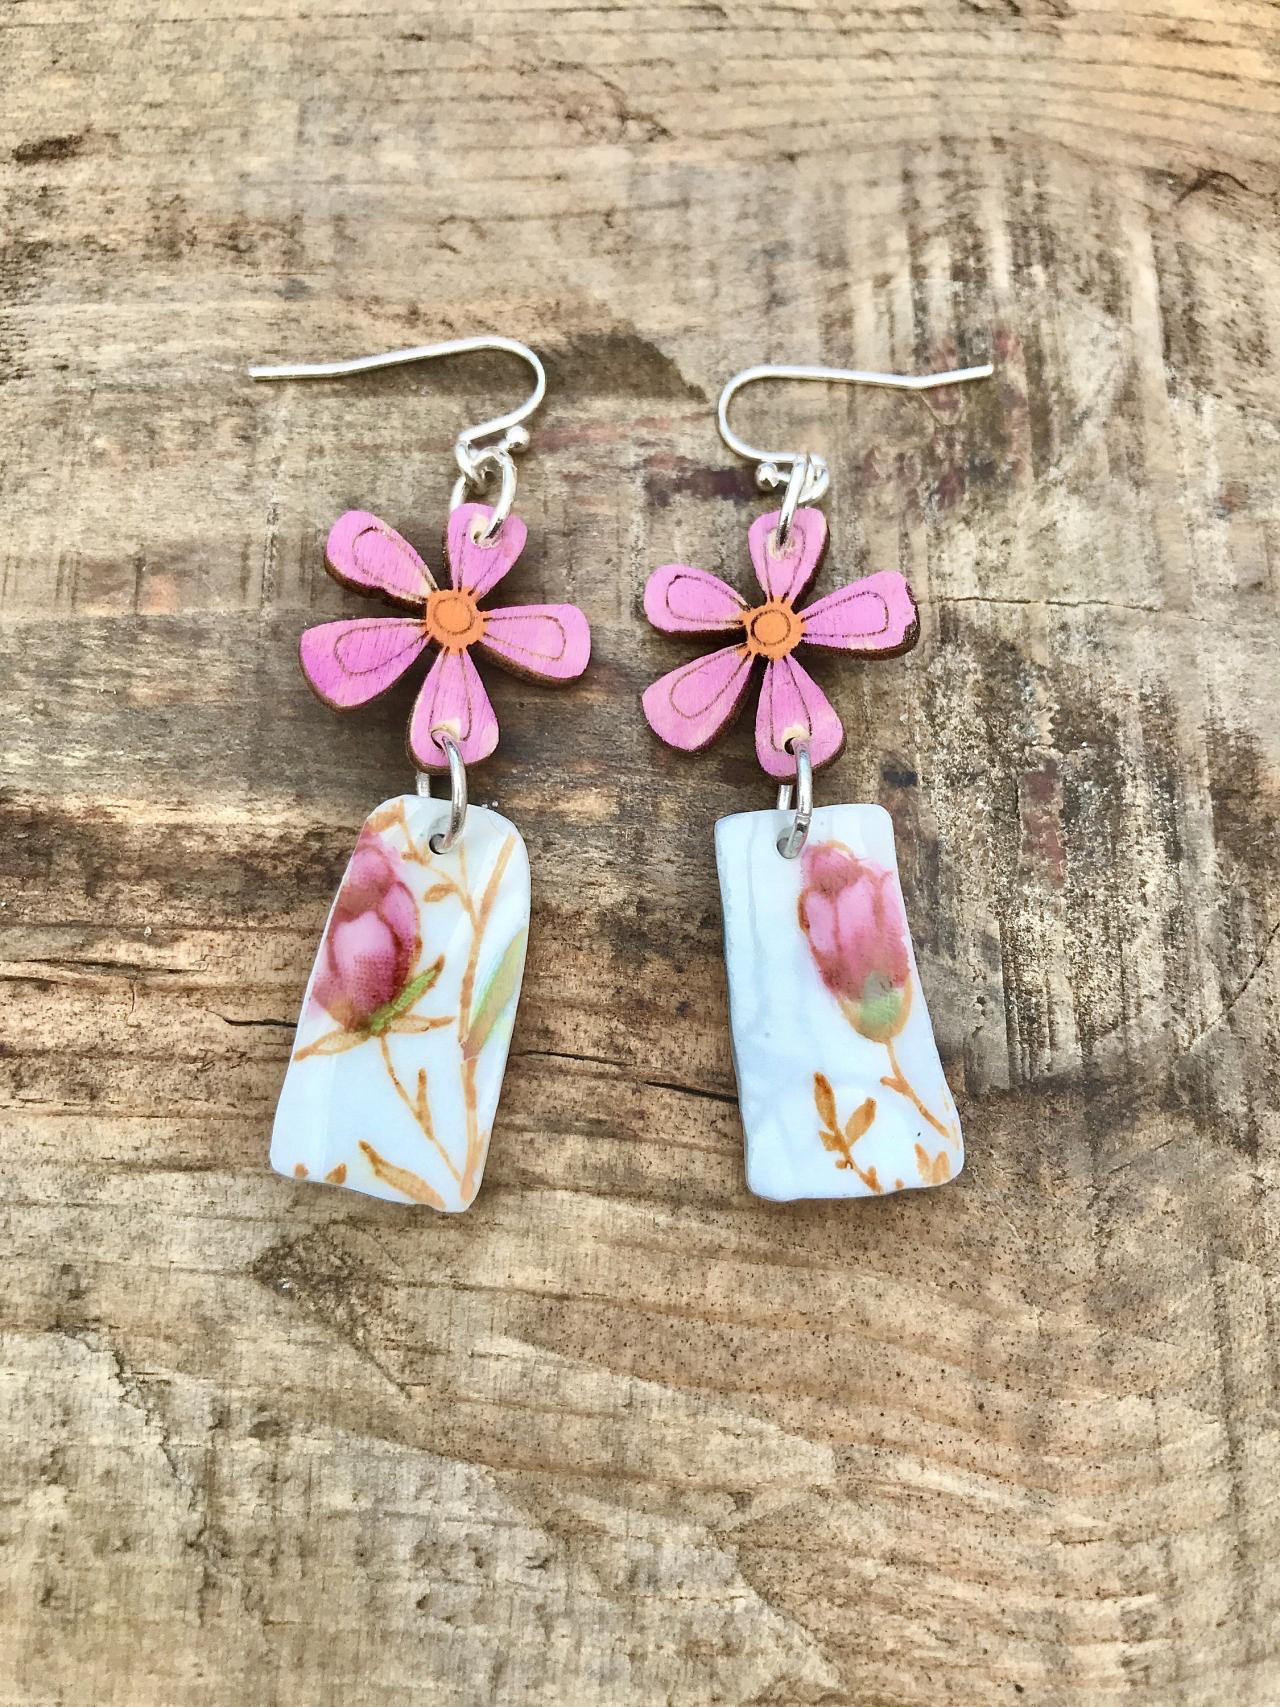 Pretty Wooden Flower And Bone China Earrings With Sterling Silver Wires